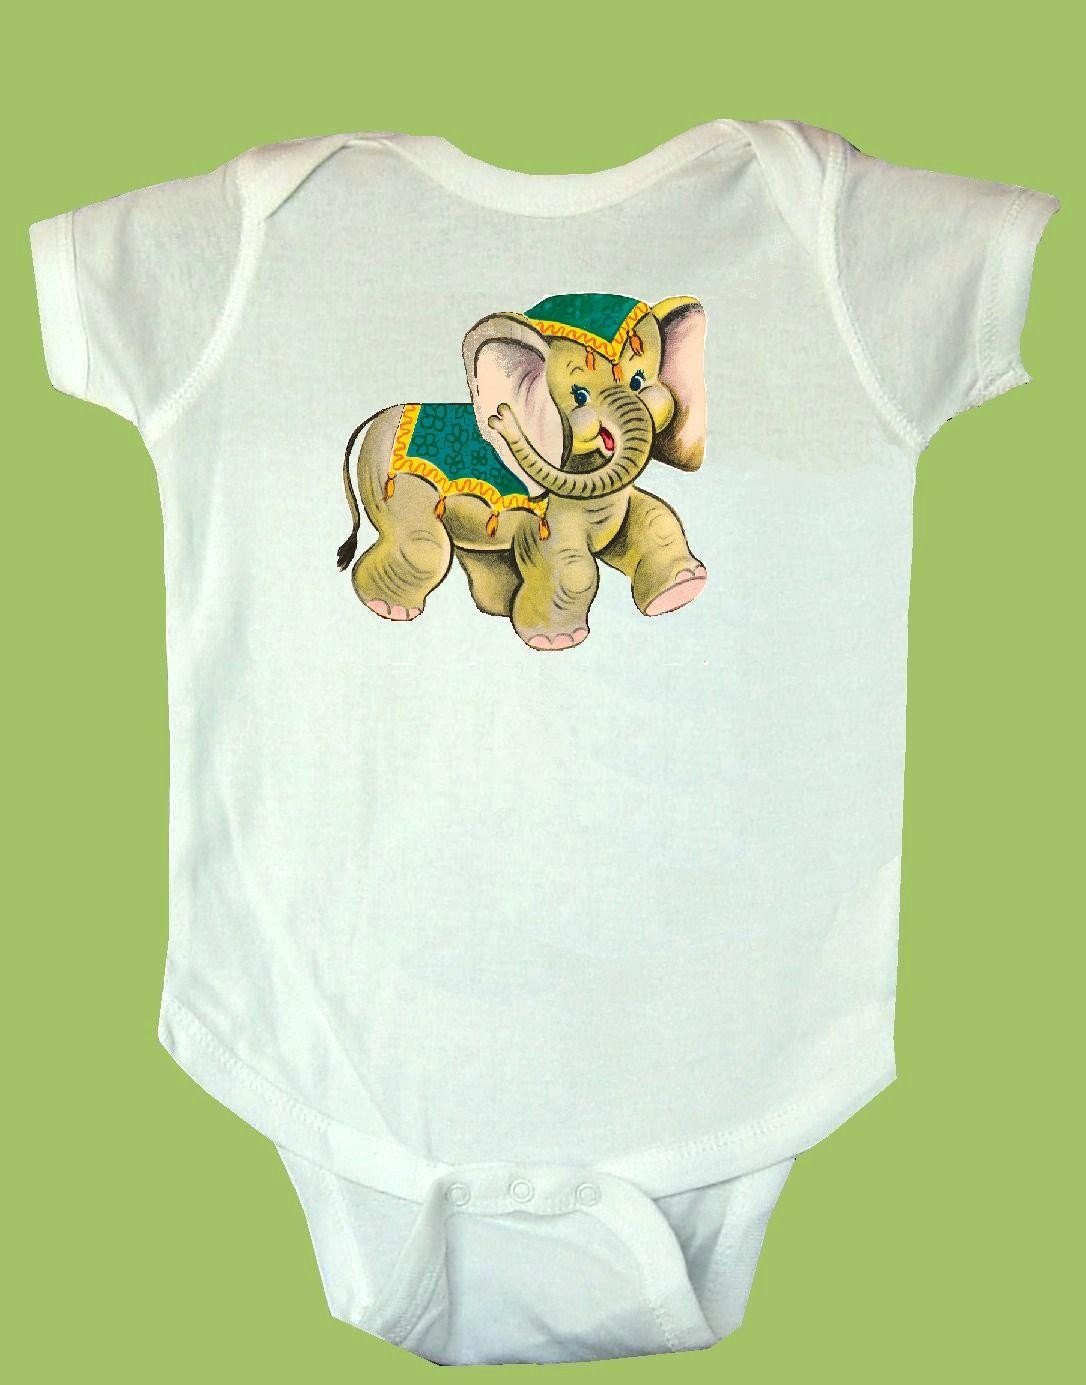 Vintage Circus Elephant Onesie and Toddler TShirt by ChiTownBoutique.etsy